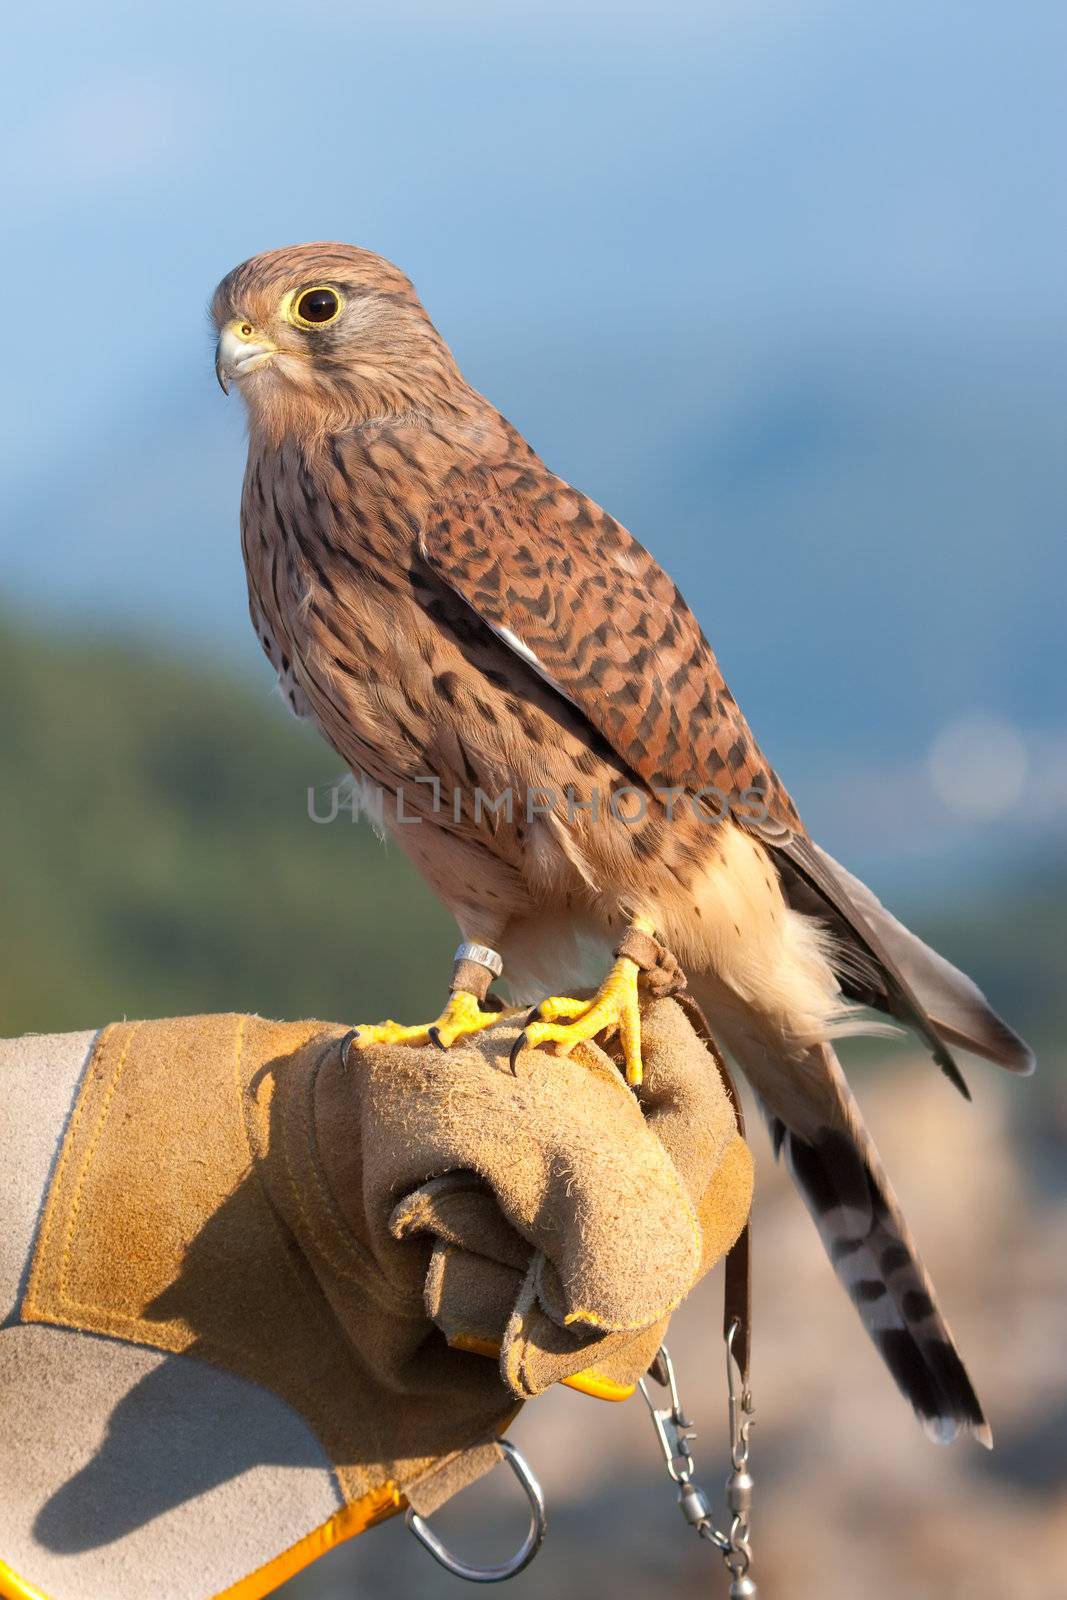 Common Kestrel (Falco tinnunculus) perched on falconer's glove. 